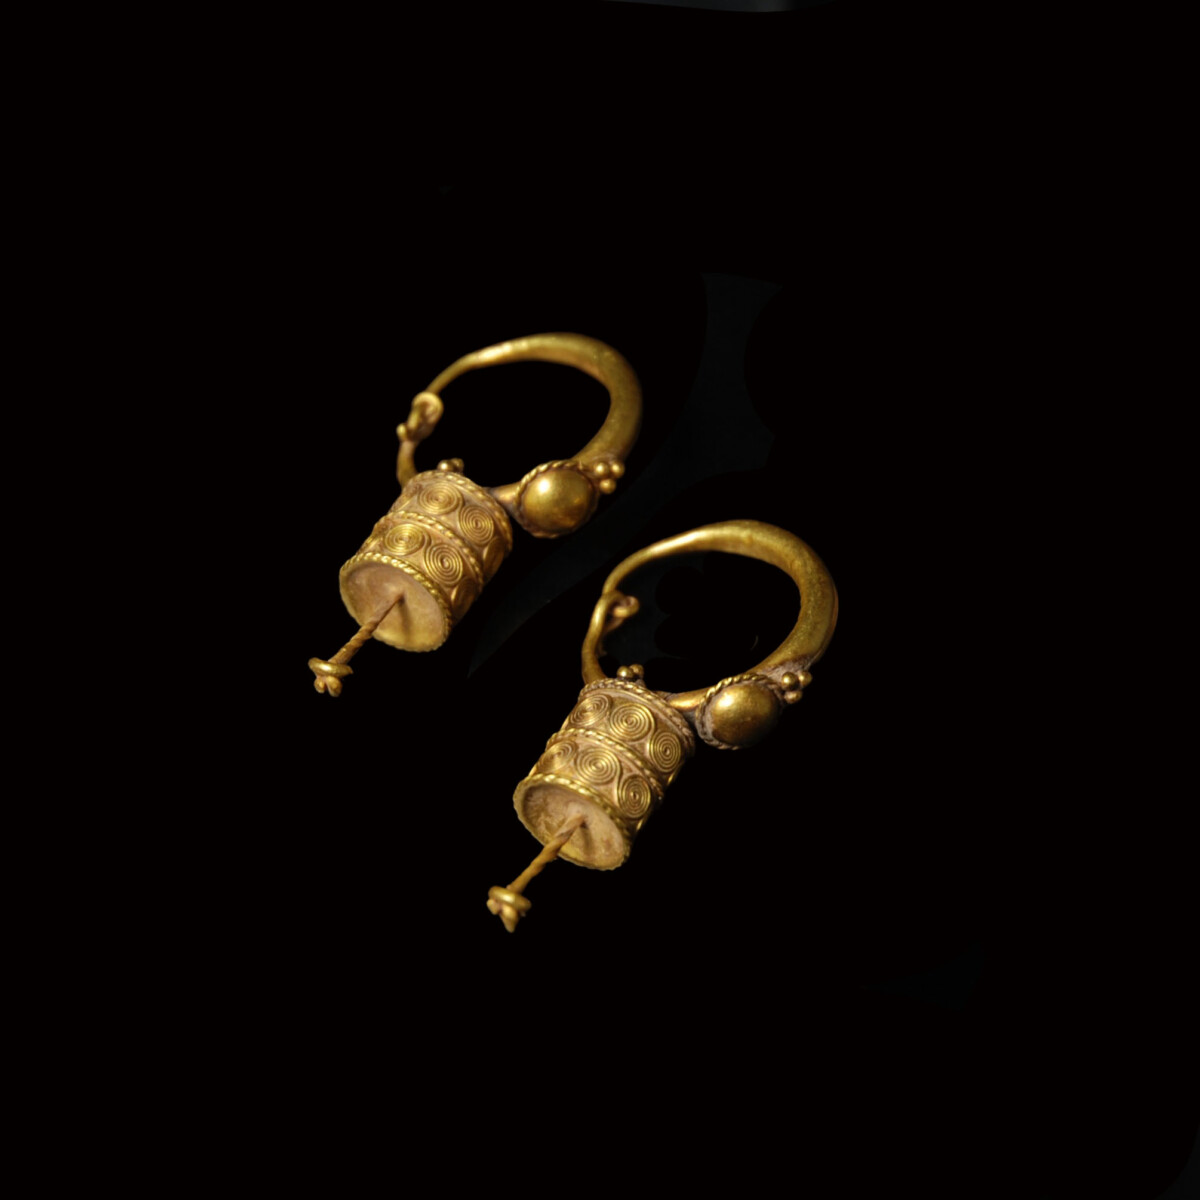 Hellenistic gold earrings with spirals